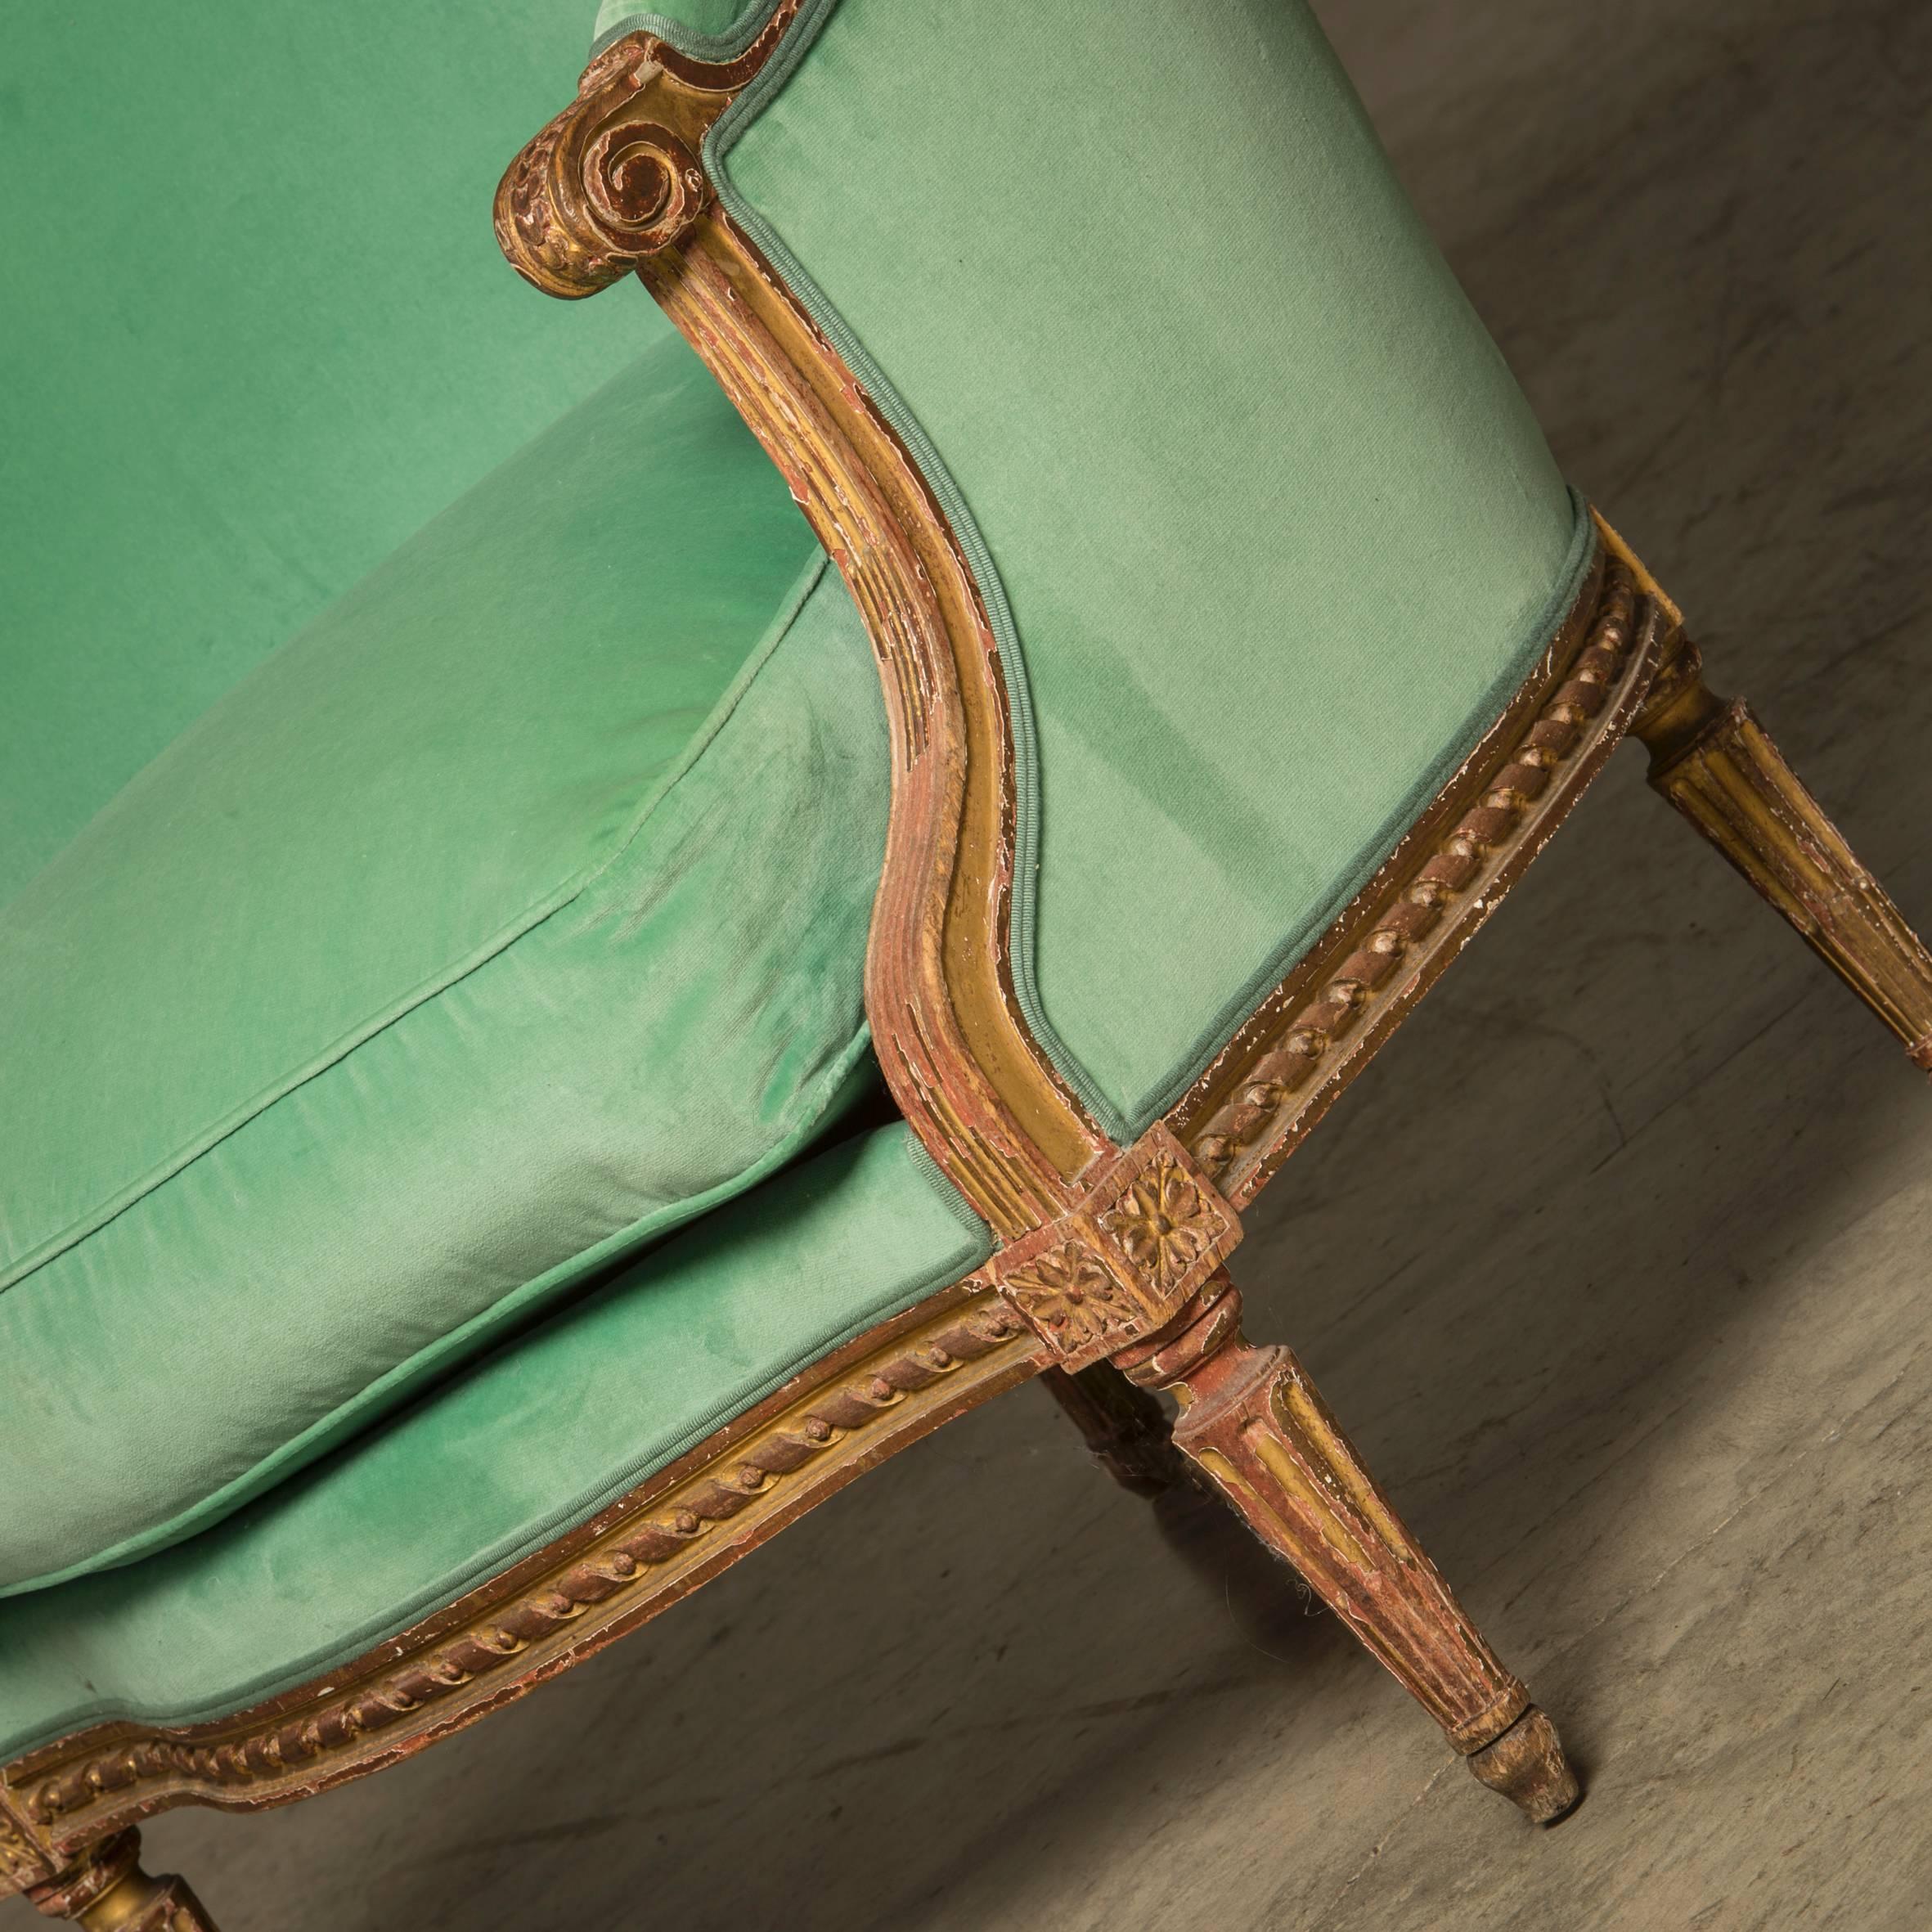 Large French bergere chair in Louis XVI style with matching footstool. Wood carved and gilded. 
France, 1850-1870.
Appears untouched with beautiful patina.

Measurements (cm):
Bergere chair: H 97 /W 75 /d 90.
Footstool: H 30 /W 56 /D 56.